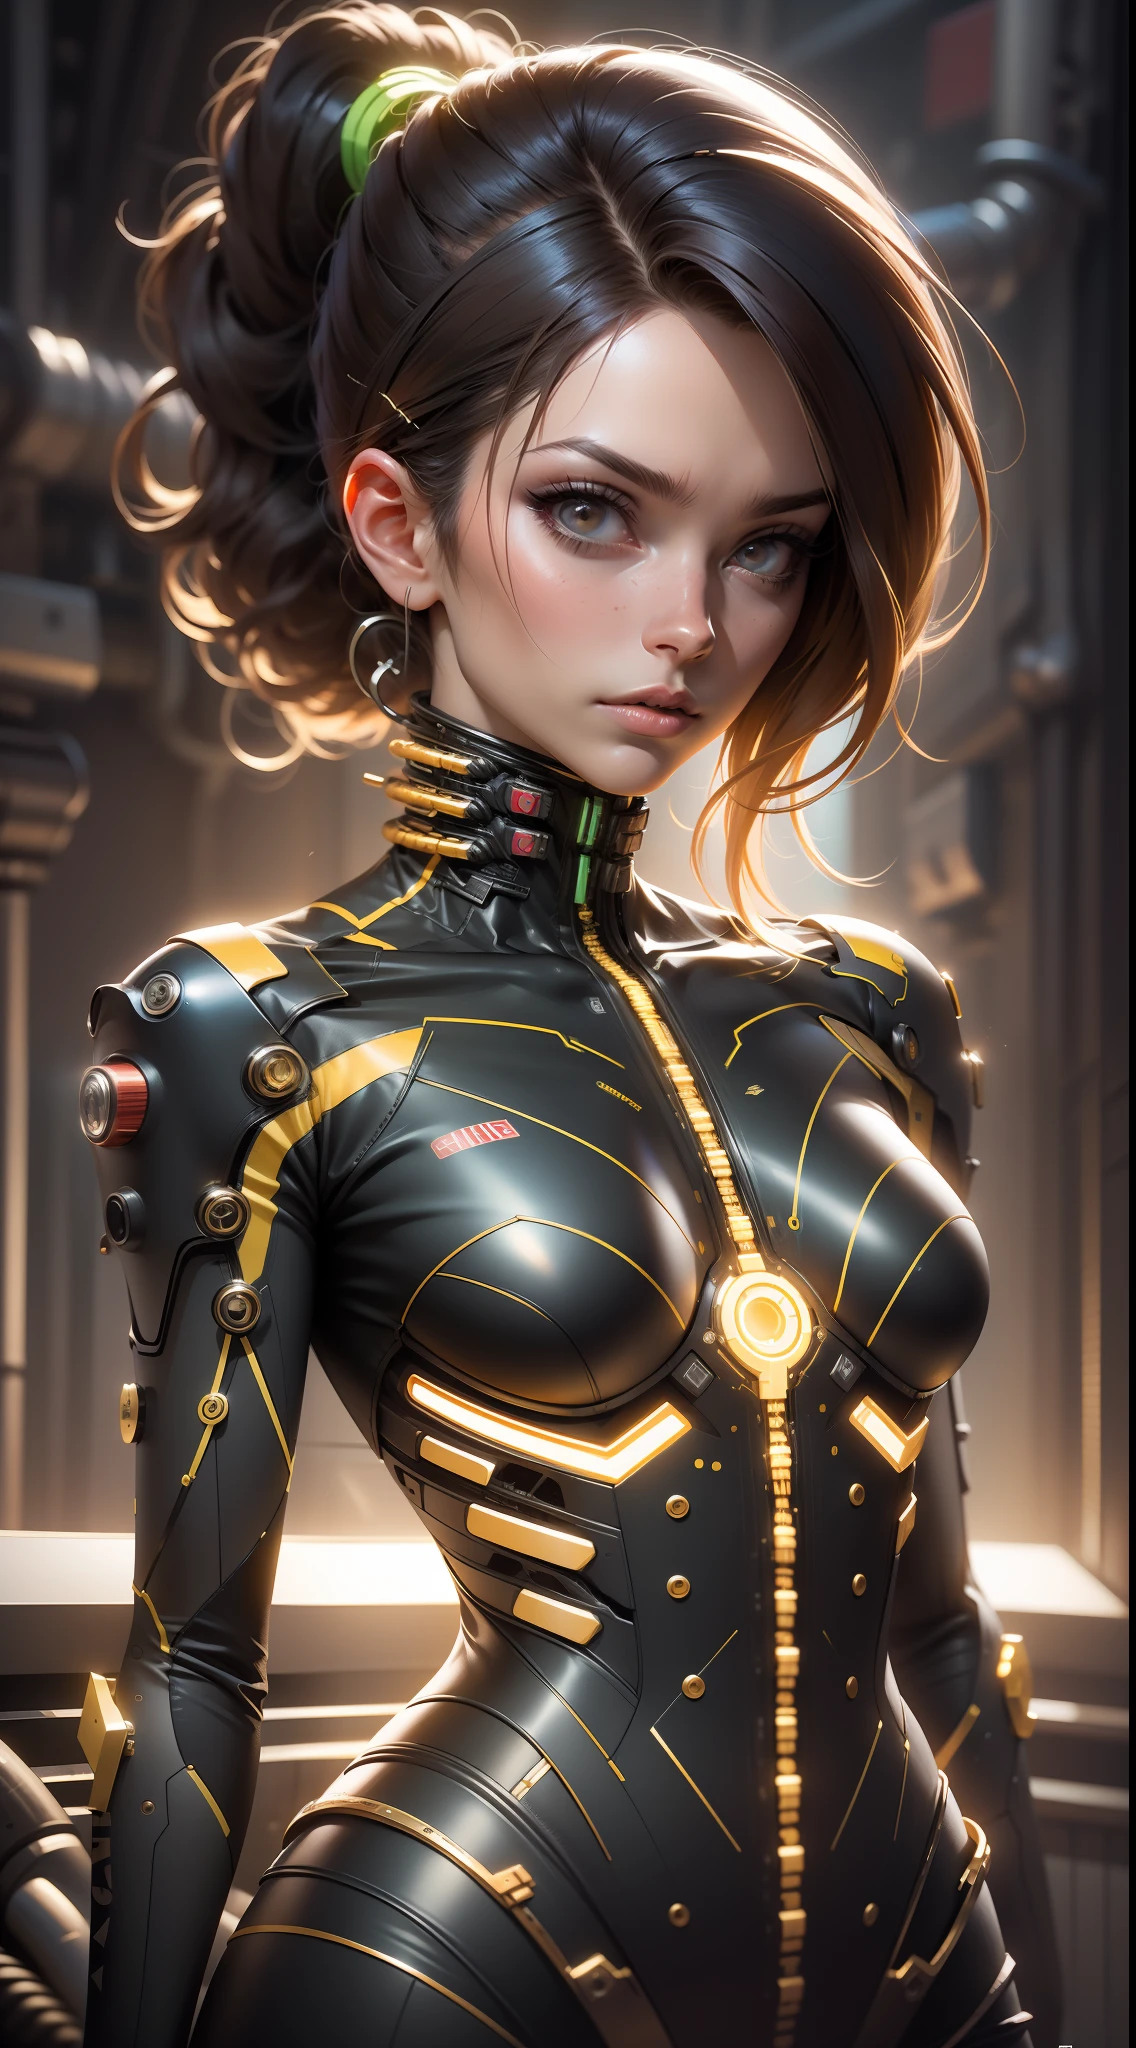 Better quality, master part, ultra high-resolution, ((photorealistic: 1.4), RAW photo, 1 Cyberpunk girl, glowing skin, 1 mechanical girl, (Ultra realistic details)), machanical limbs, Tubes connected to mechanical parts, mechanical vertebrae adhered to the spine, mechanical cervical attachment to the neck, wires and cables connecting to the head, Evangelion, Ghost in the Shell, small bright LED bulbs, Global lighting, deep shadows, octane rendering, 8k, ultra sharp, Metal, intricate details of the ornament, Baroque details, very intricate details, realistic light, CGSoation Trend, Facing the camera, neon details, (Android Manufactory in the background), art by H.r. Giger e Alphonse Mucha.